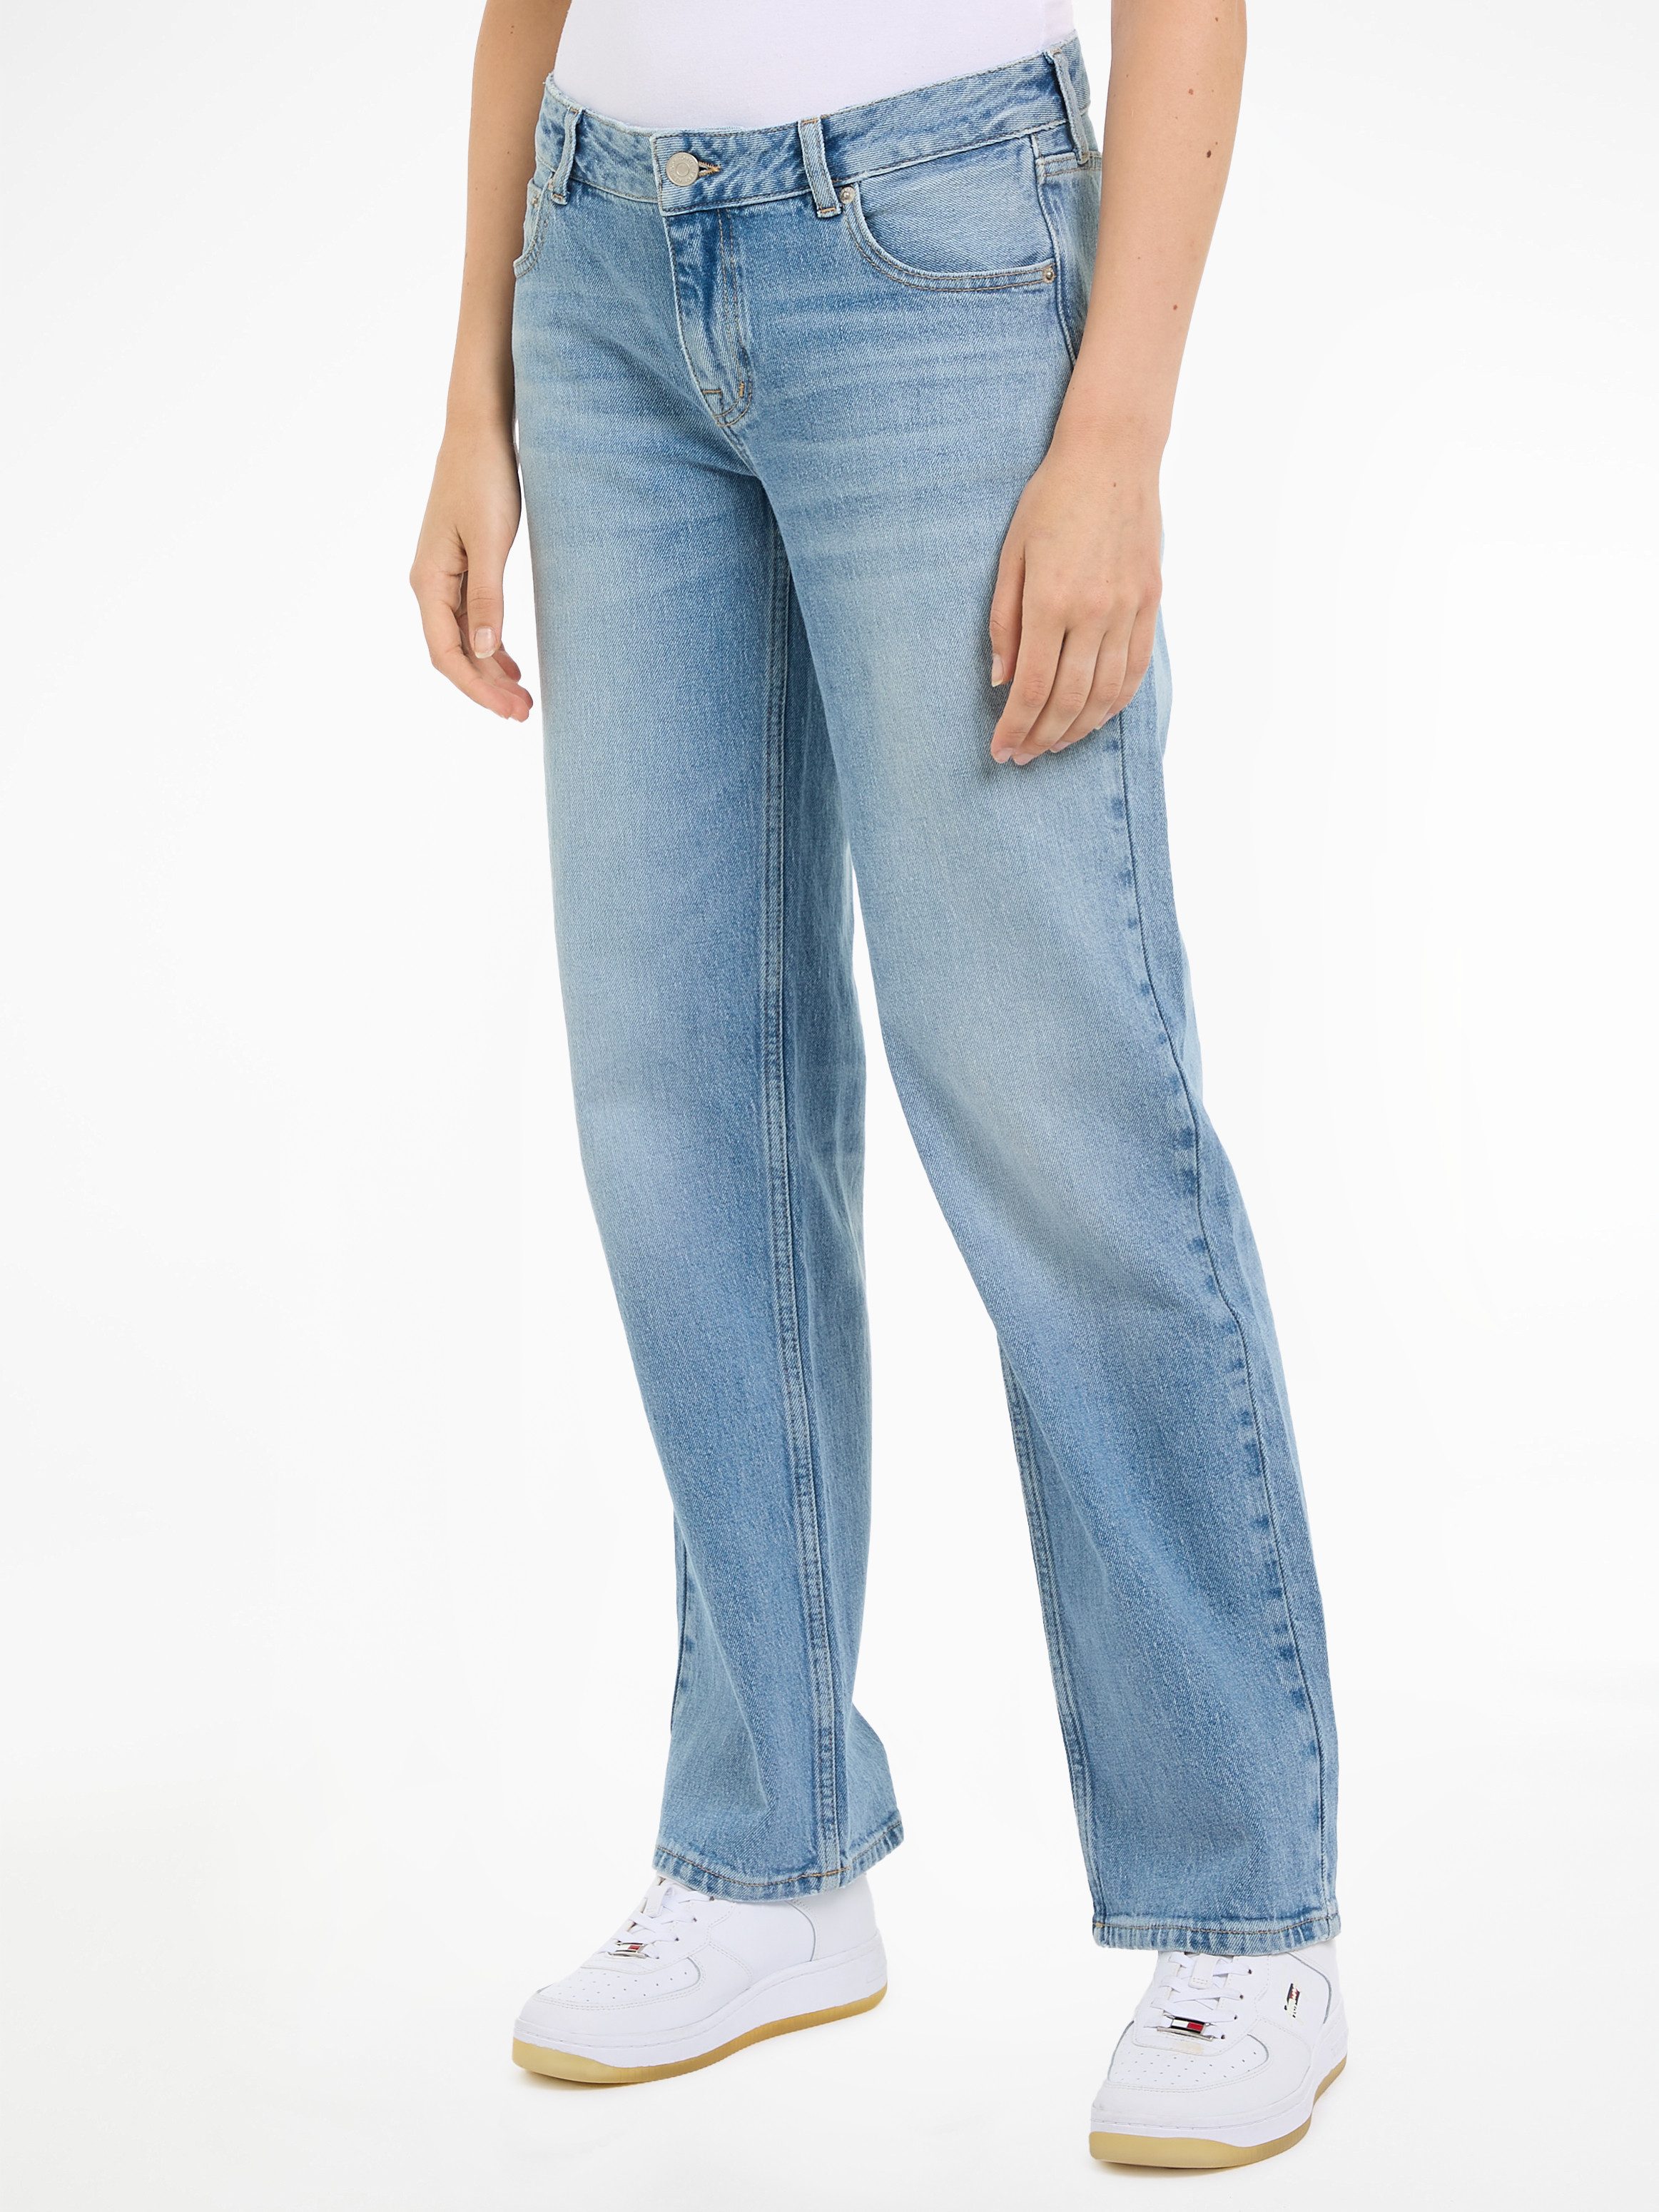 Tommy Jeans Straight-Jeans Tommy Jeans - Damenjeans - Low Waist - Straight leg Gerade geschnittene Jeans mit Tommy Logo-Badge und niedriger Taille